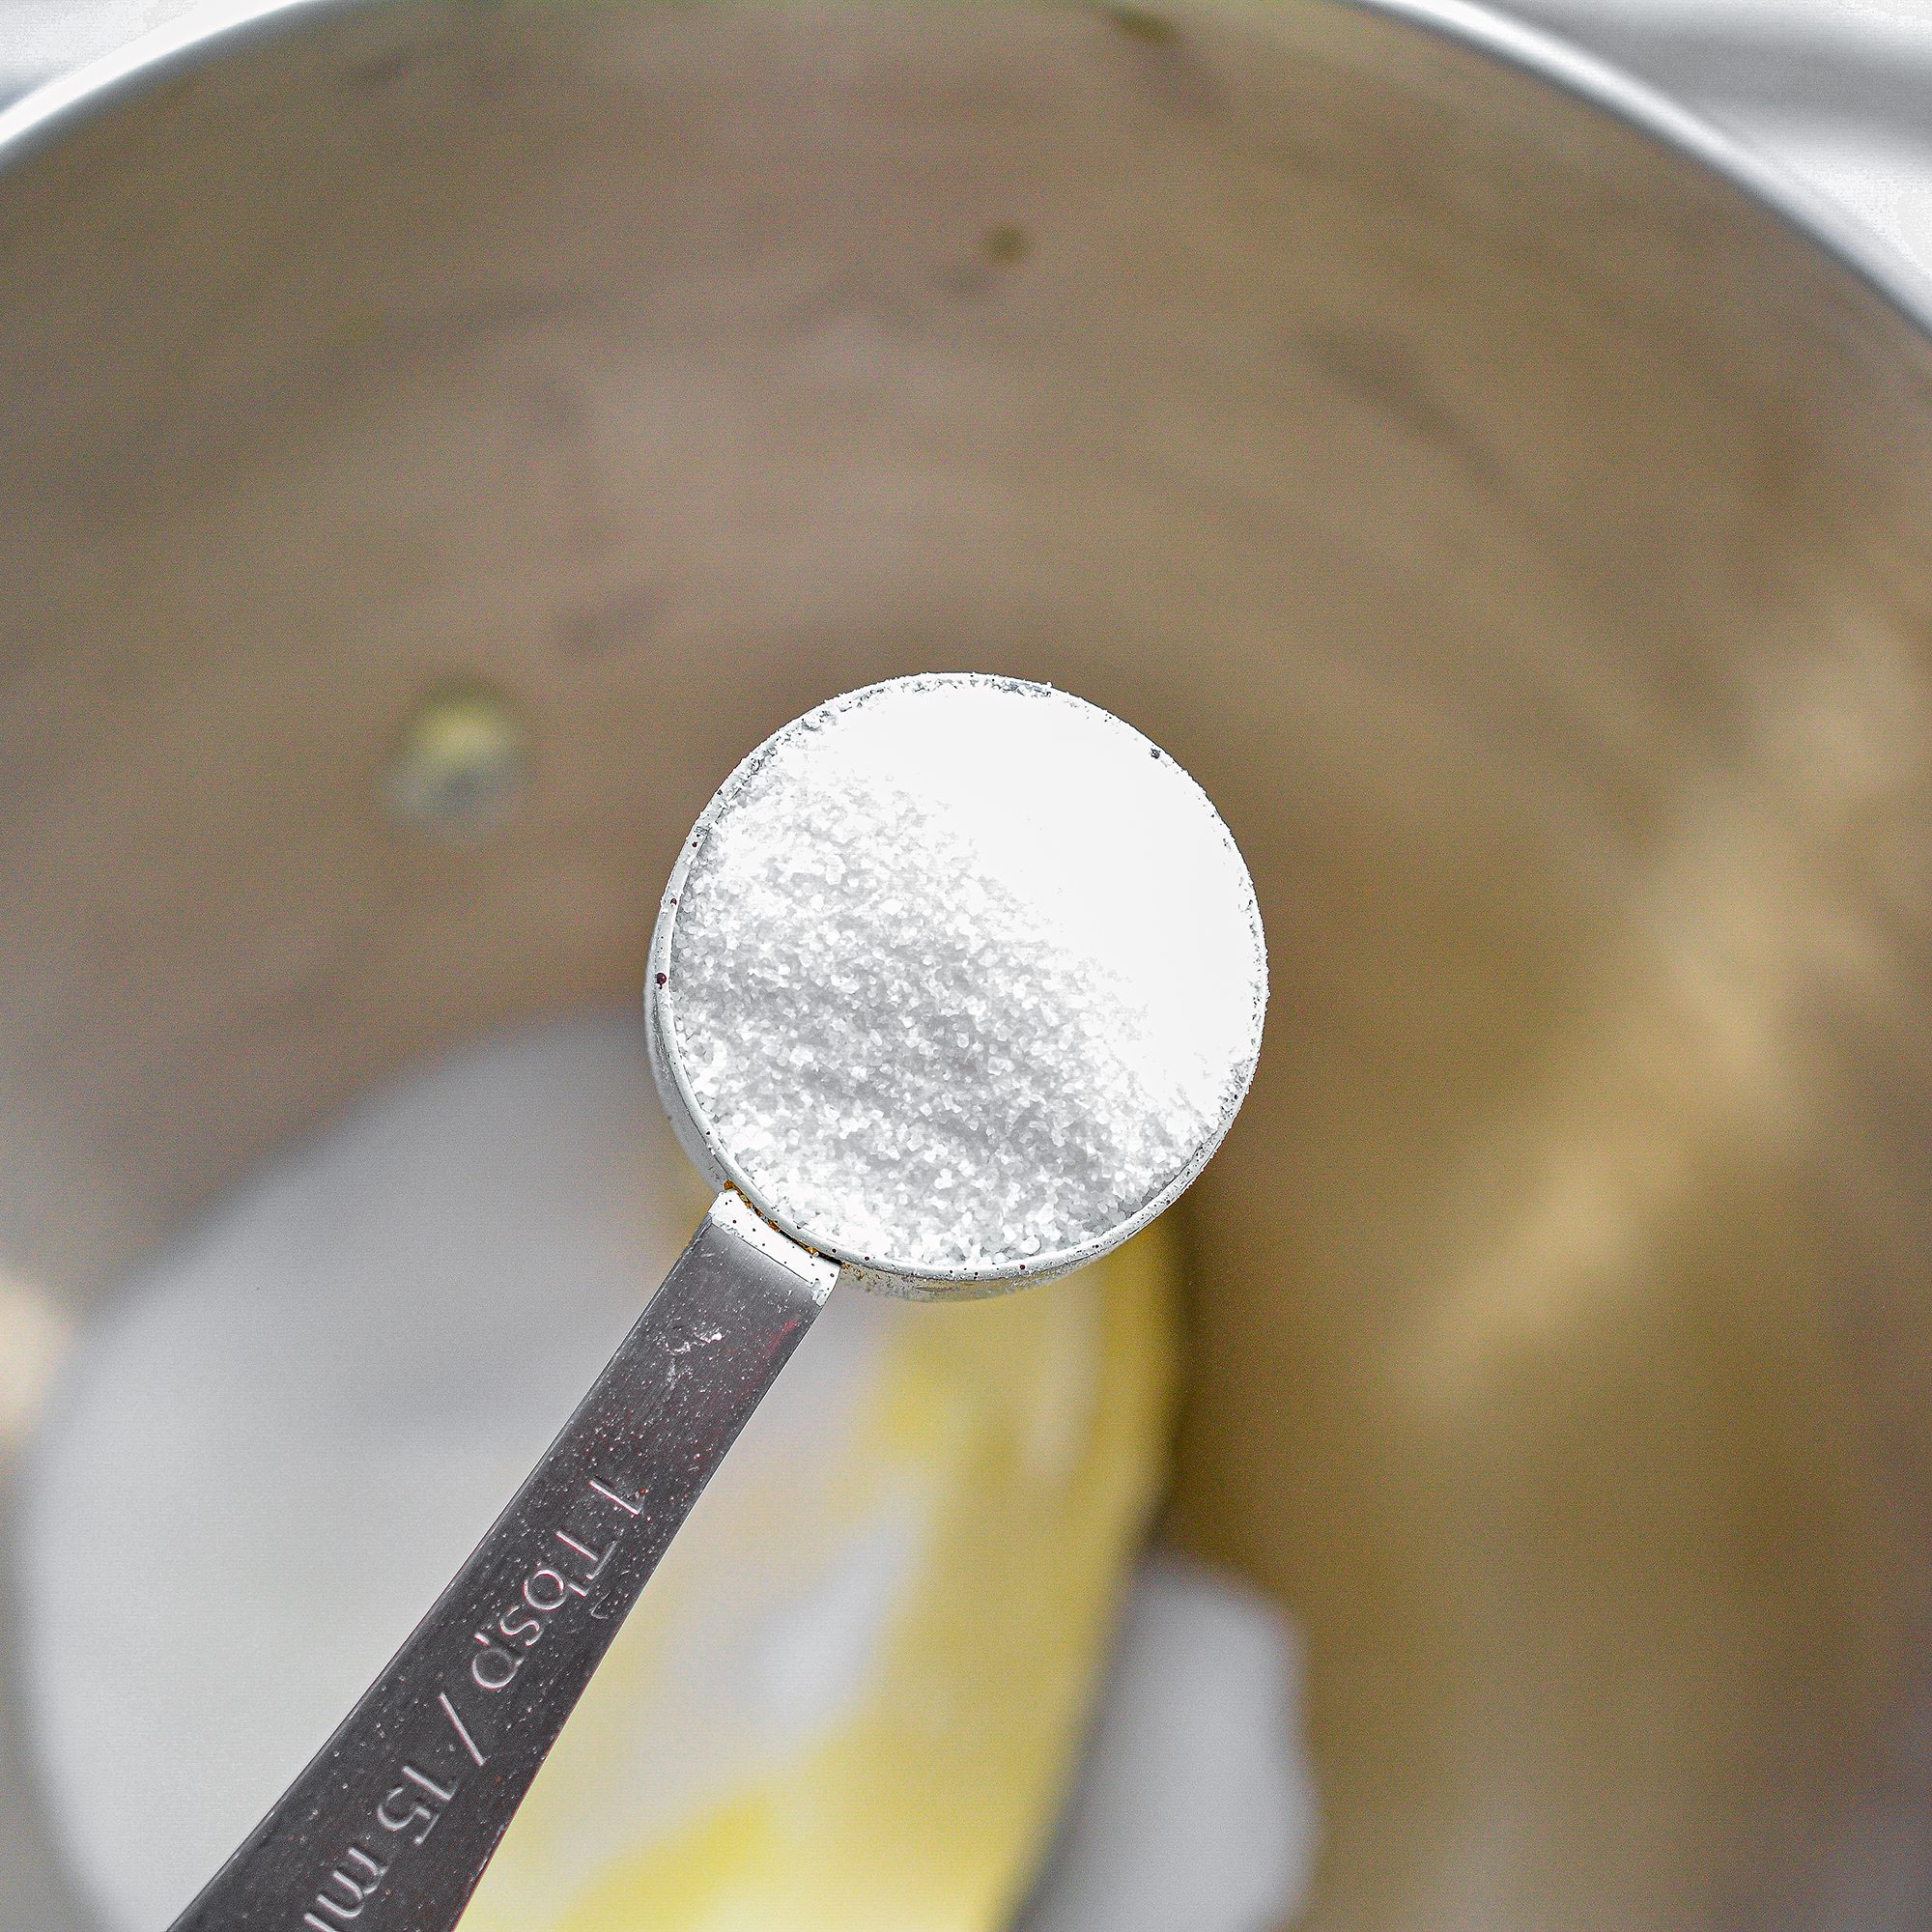 In a mixing bowl, blend together the sugars, butter and vanilla until creamy.